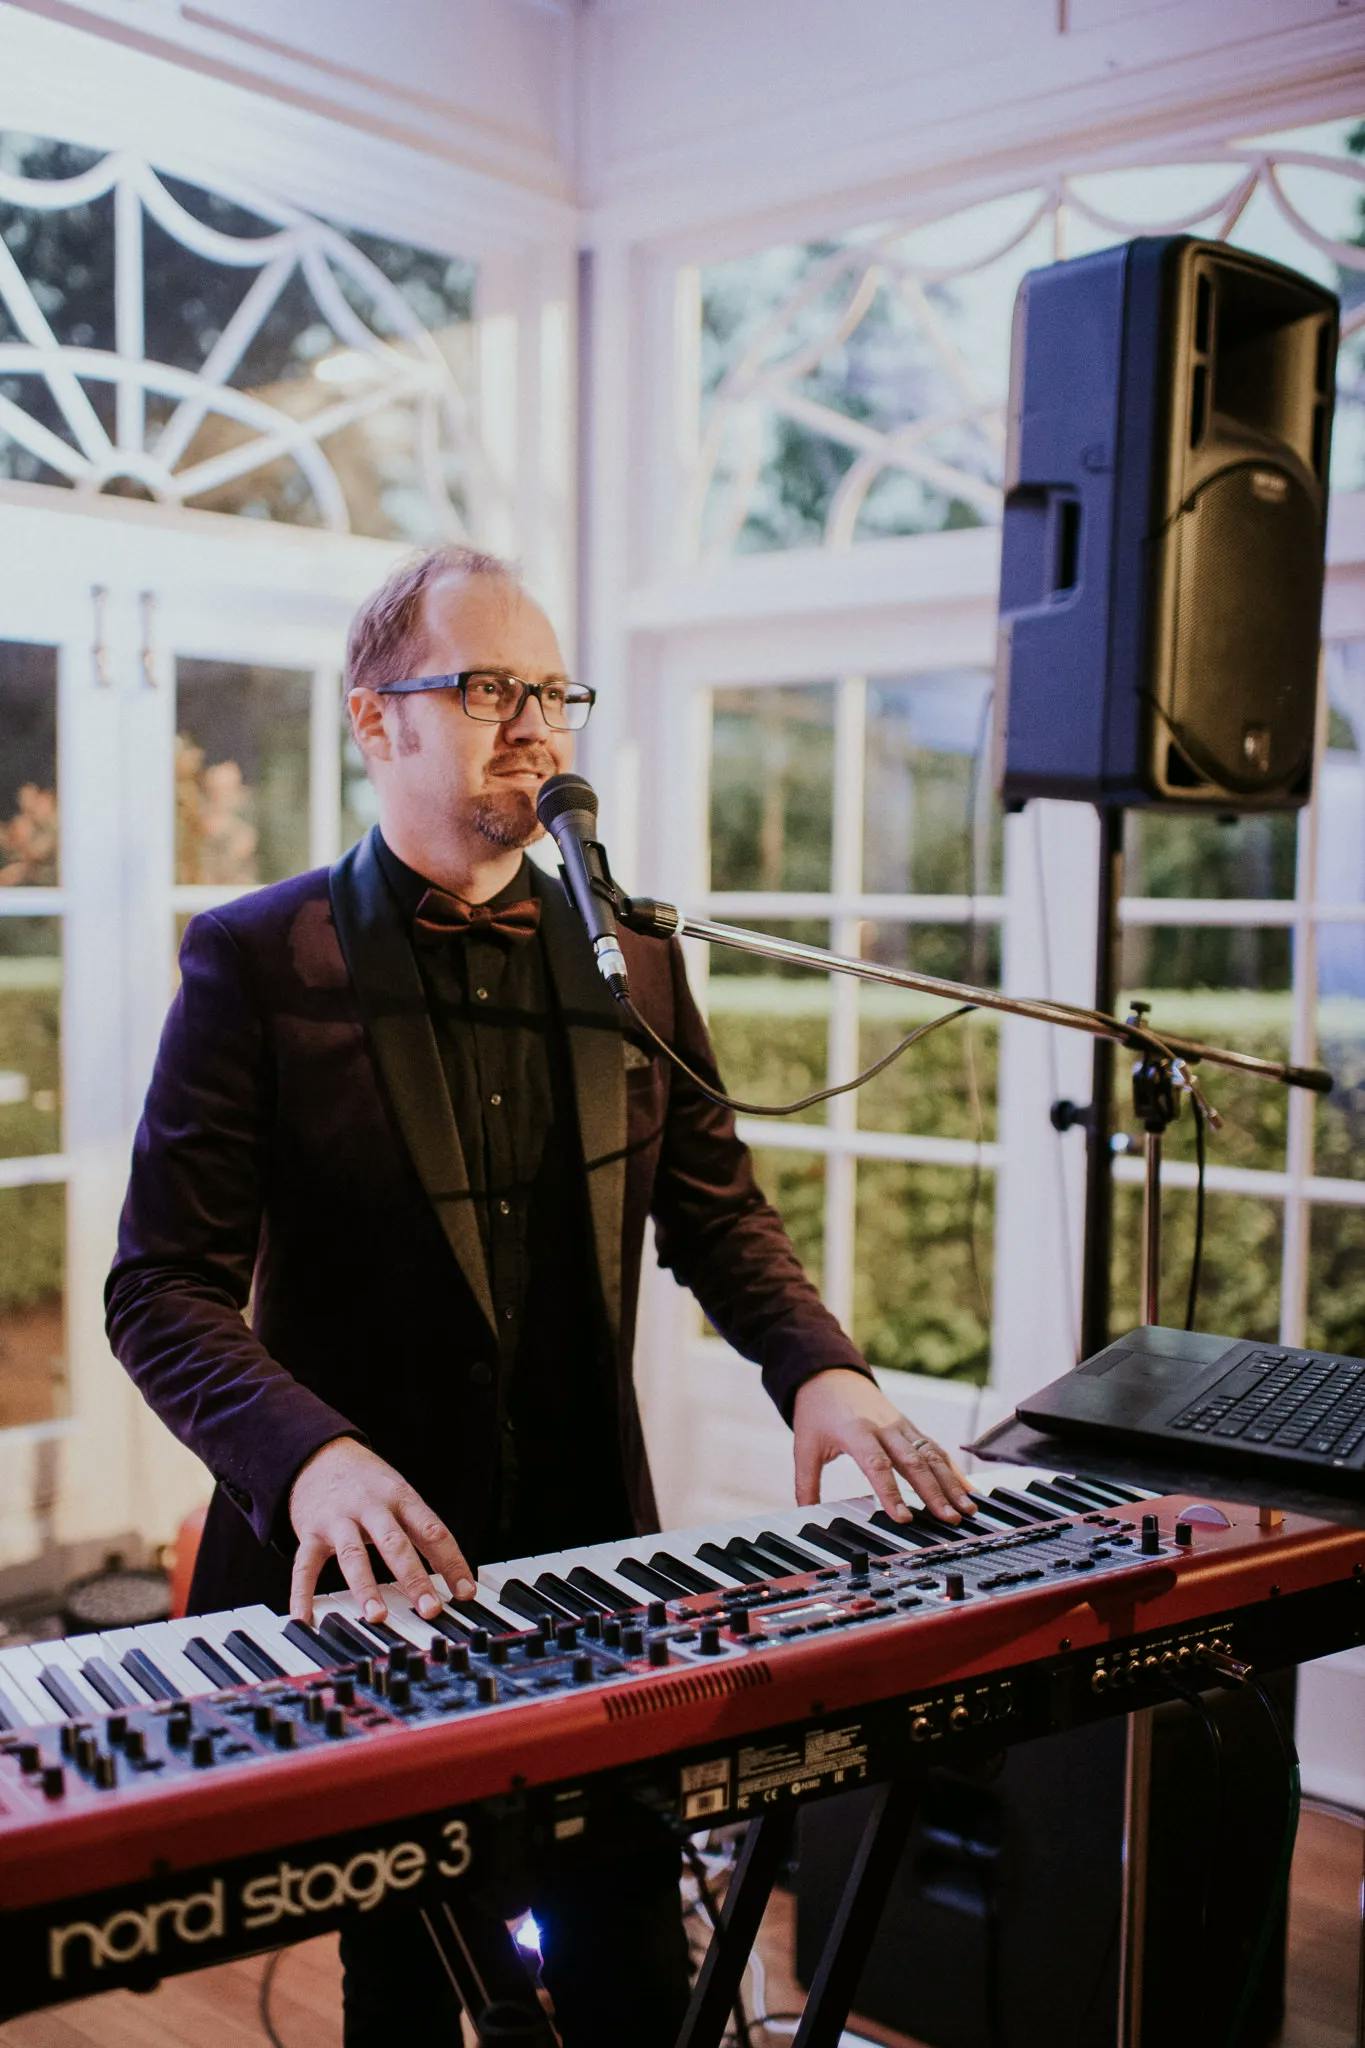 A musician wearing glasses and a dark suit plays a Nord Stage 3 keyboard while singing into a microphone. He is performing in a well-lit room with large windows and a speaker positioned behind him.